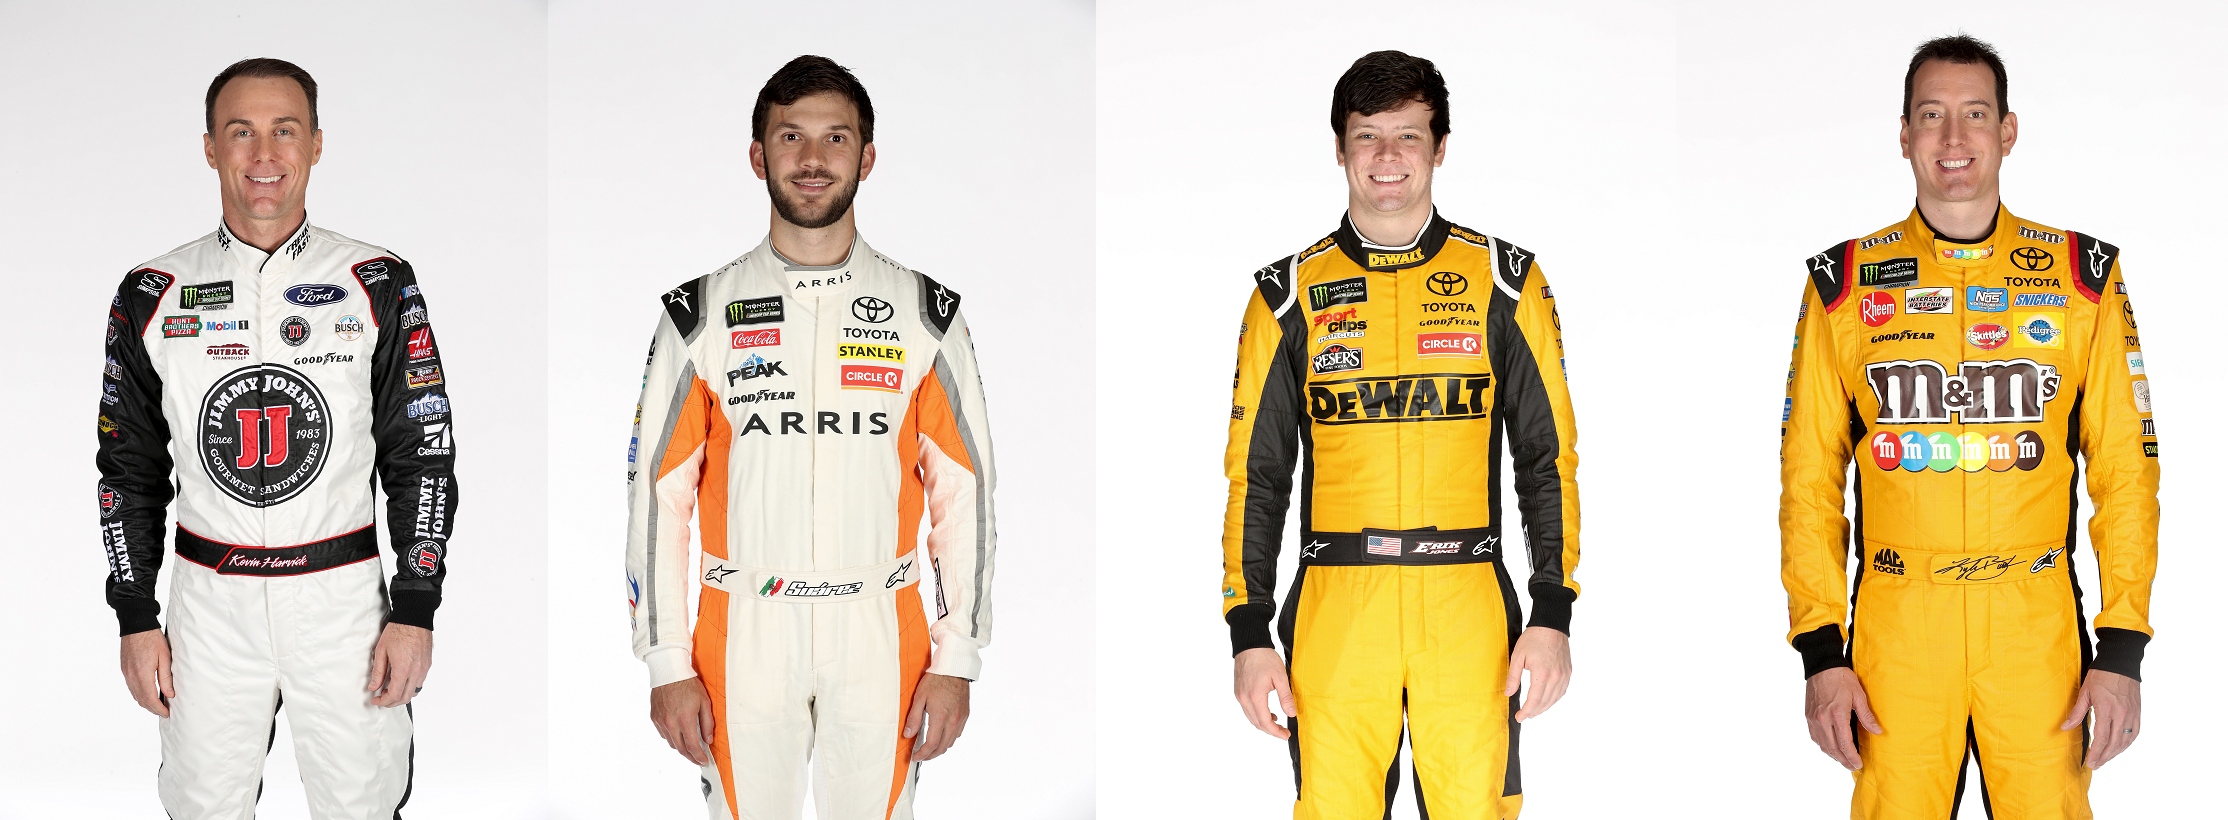 Can one of these quartet win tonight at Bristol Motor Speedway?